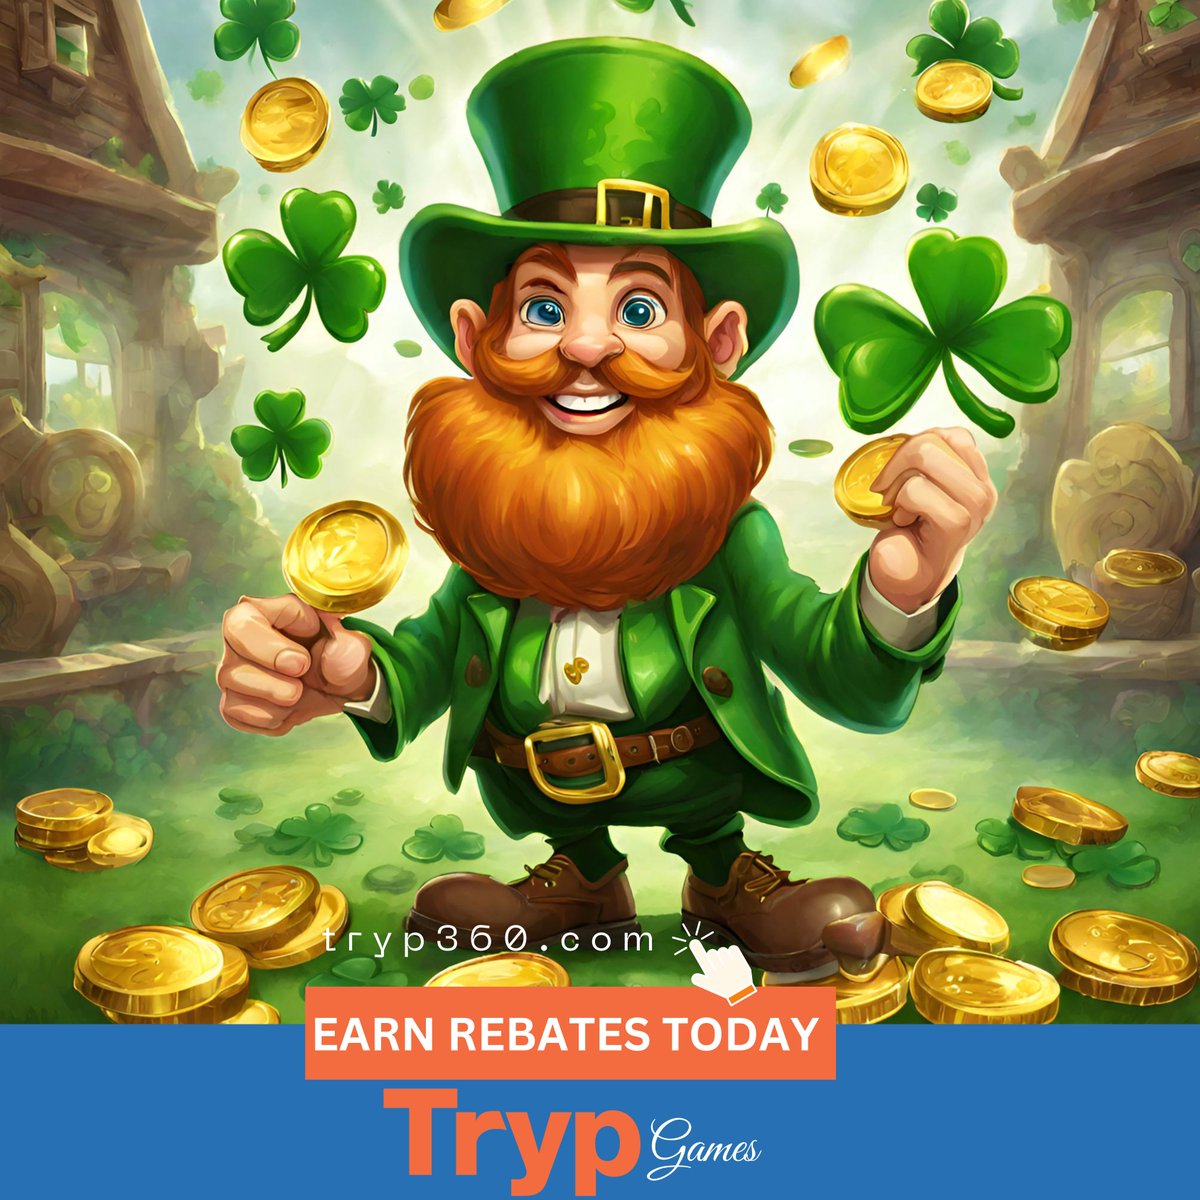 Feeling lucky? 📷📷 Visit us at Tryp360.com to sign up today and play the Lucky Irish game! 📷📷 Earning real rebates has never been easier, or more fun! 📷 #Tryp360 #LuckyIrish #RealRebates #FunAndEarnings